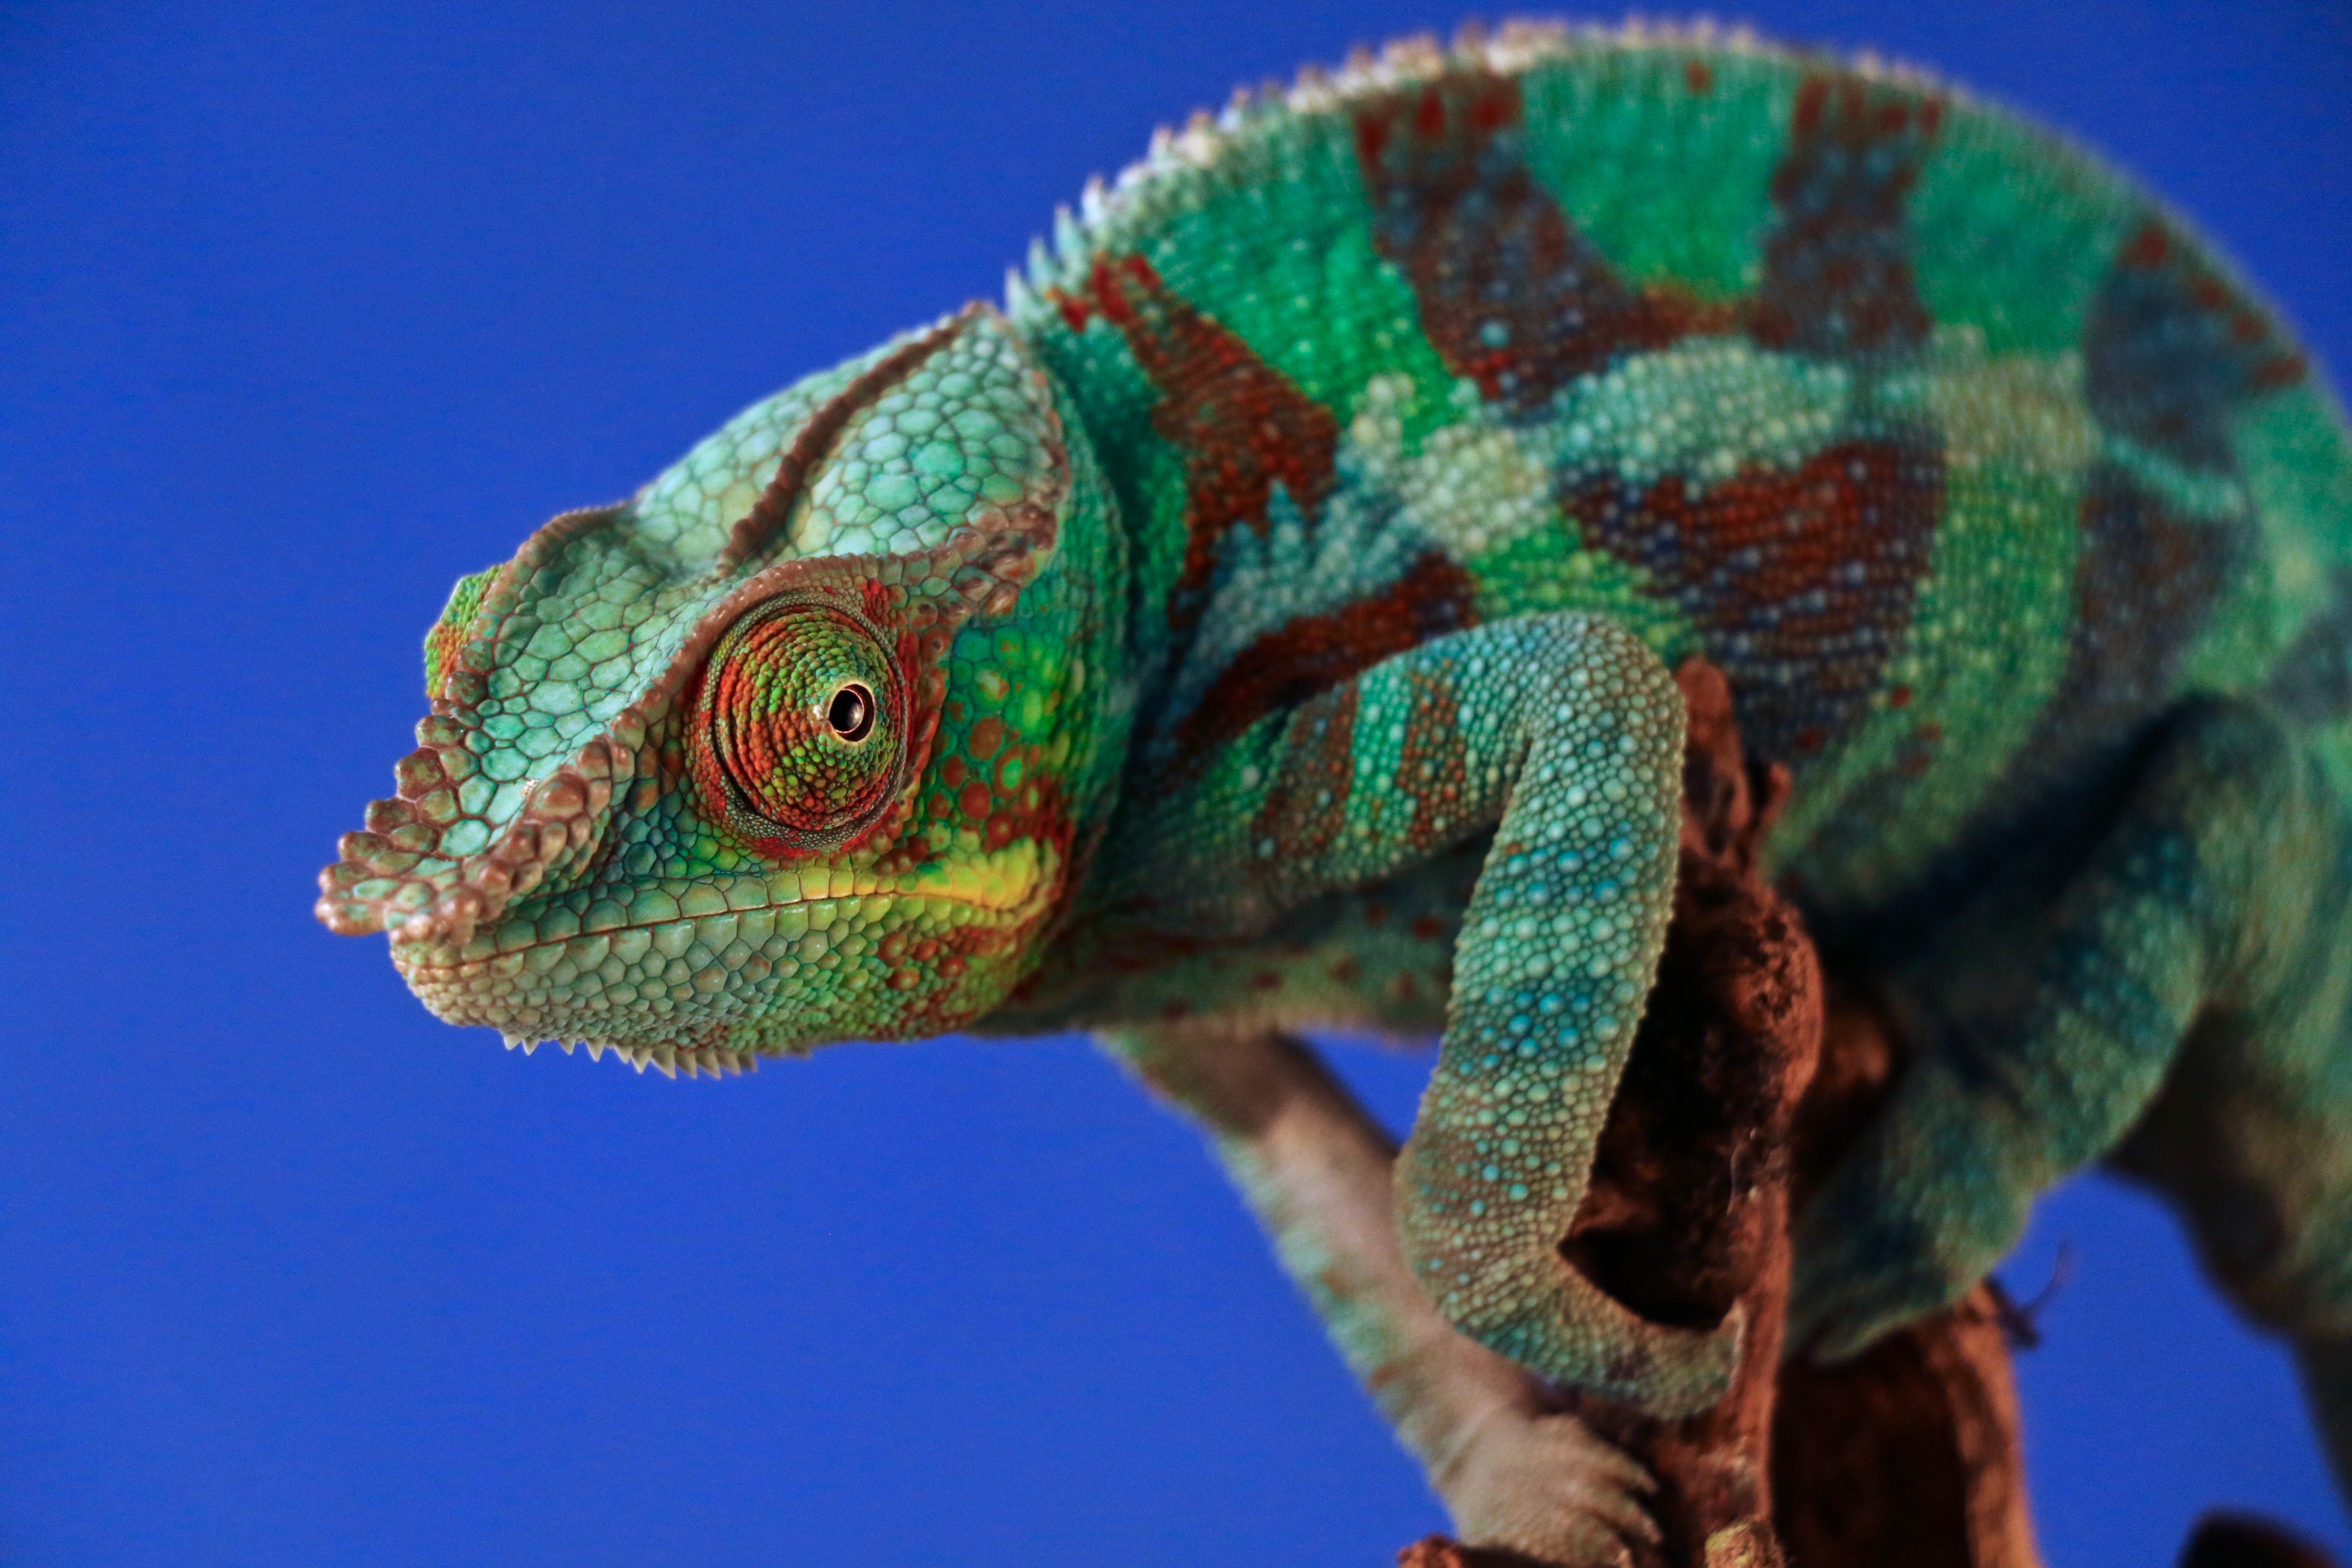 The Pros And Cons Of Keeping A Chameleon As A Pet Pet Comments,How Many Calories In Hummus